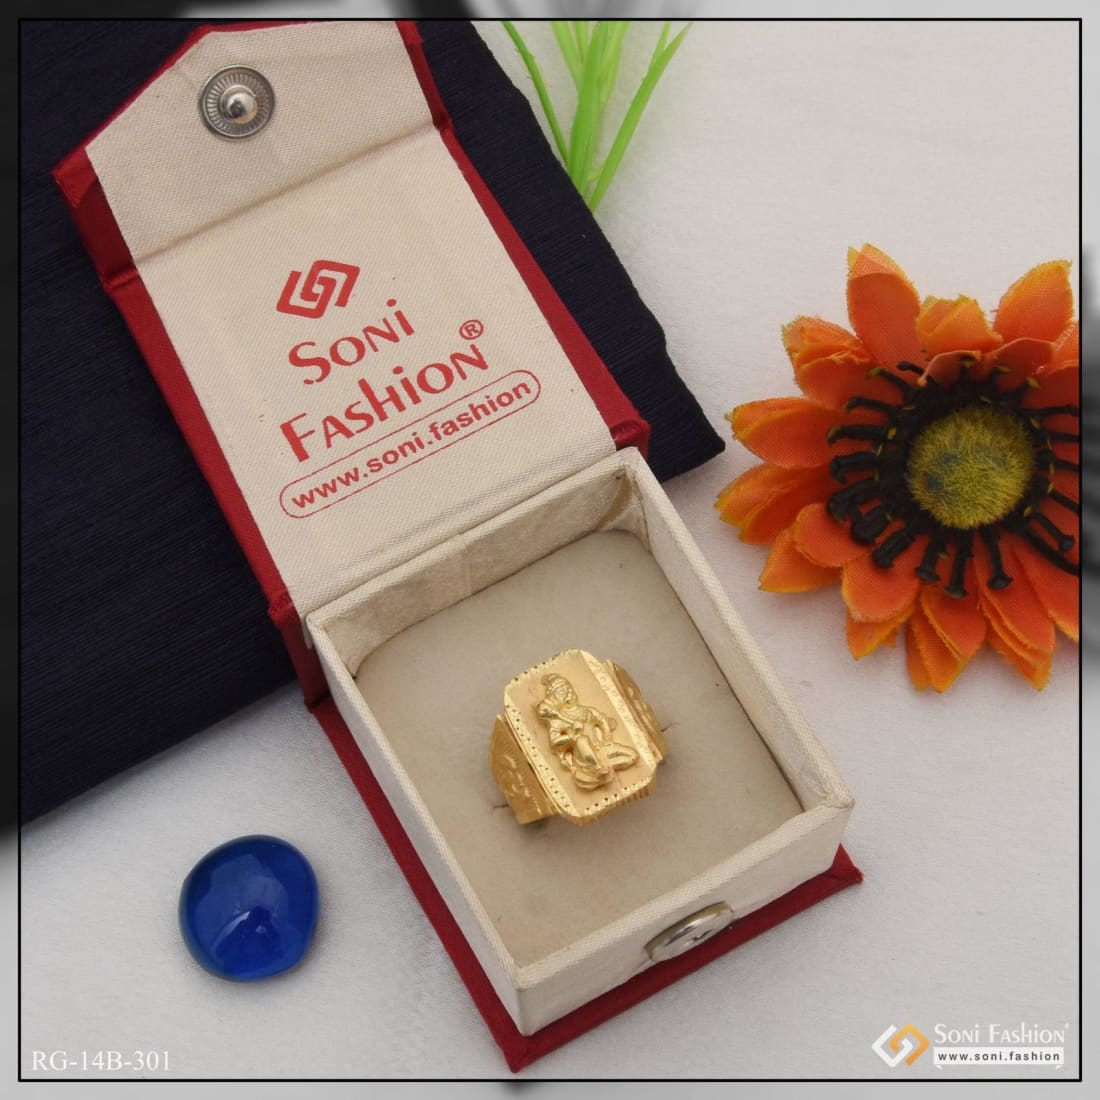 Buy Attractive Fashionable Gold Rings |GRT Jewellers